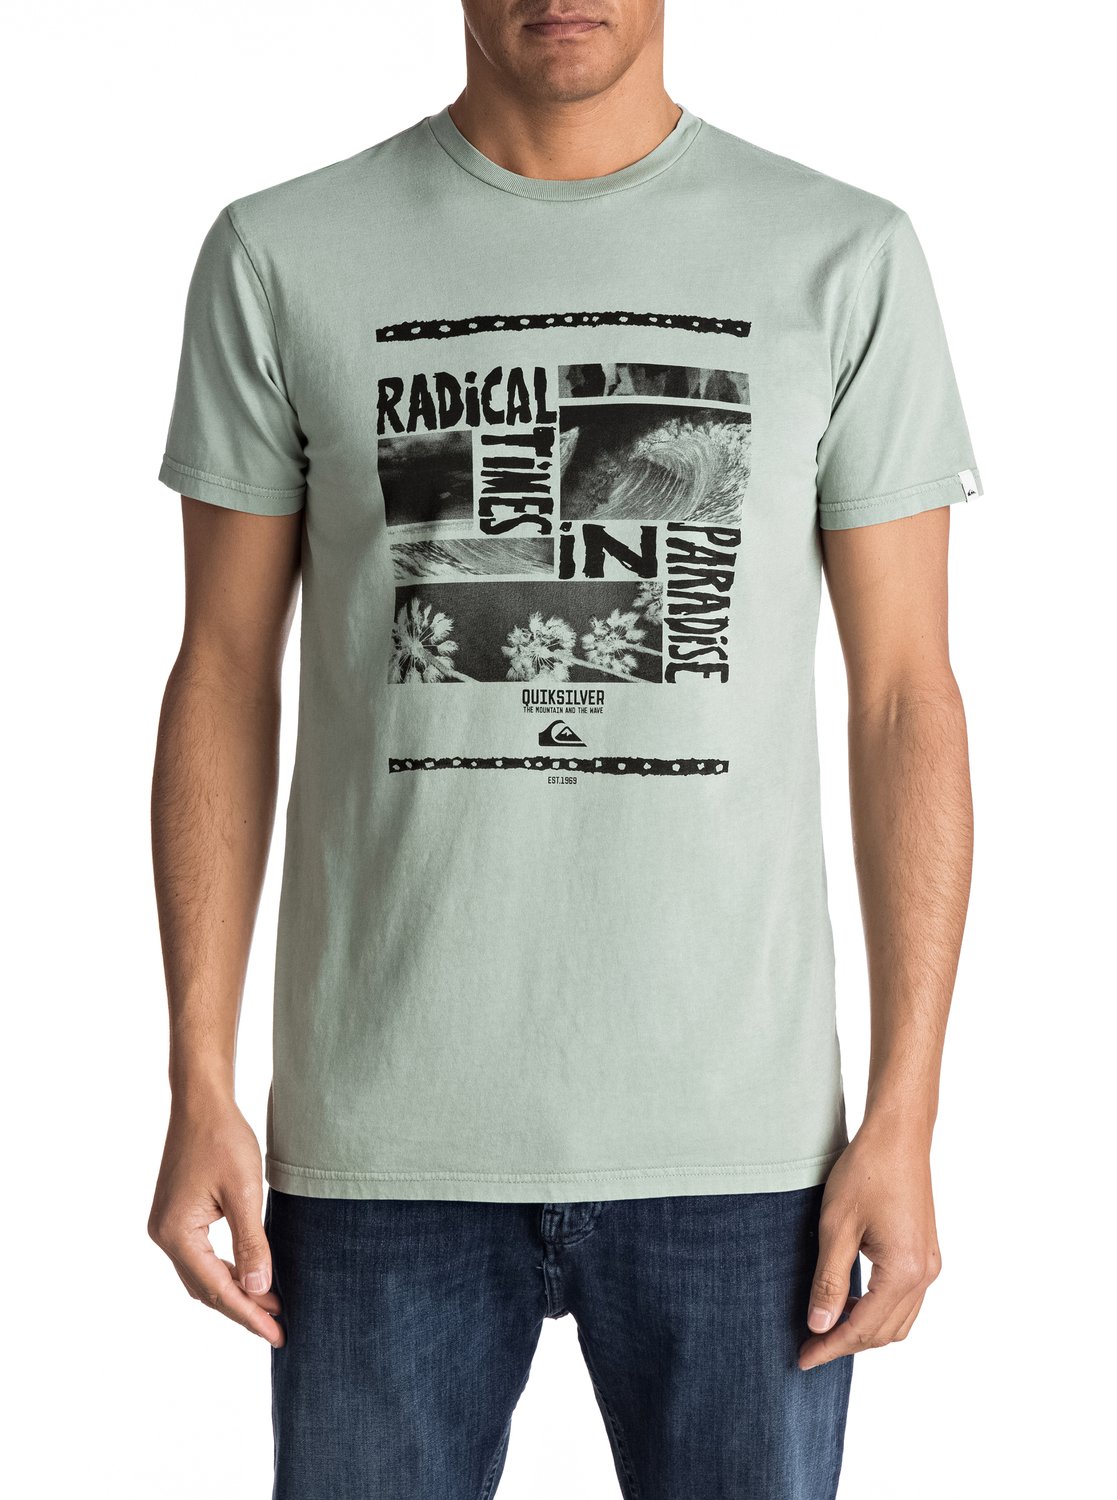 Speciality Radical Trip - Tee-Shirt pour Homme - Quiksilver